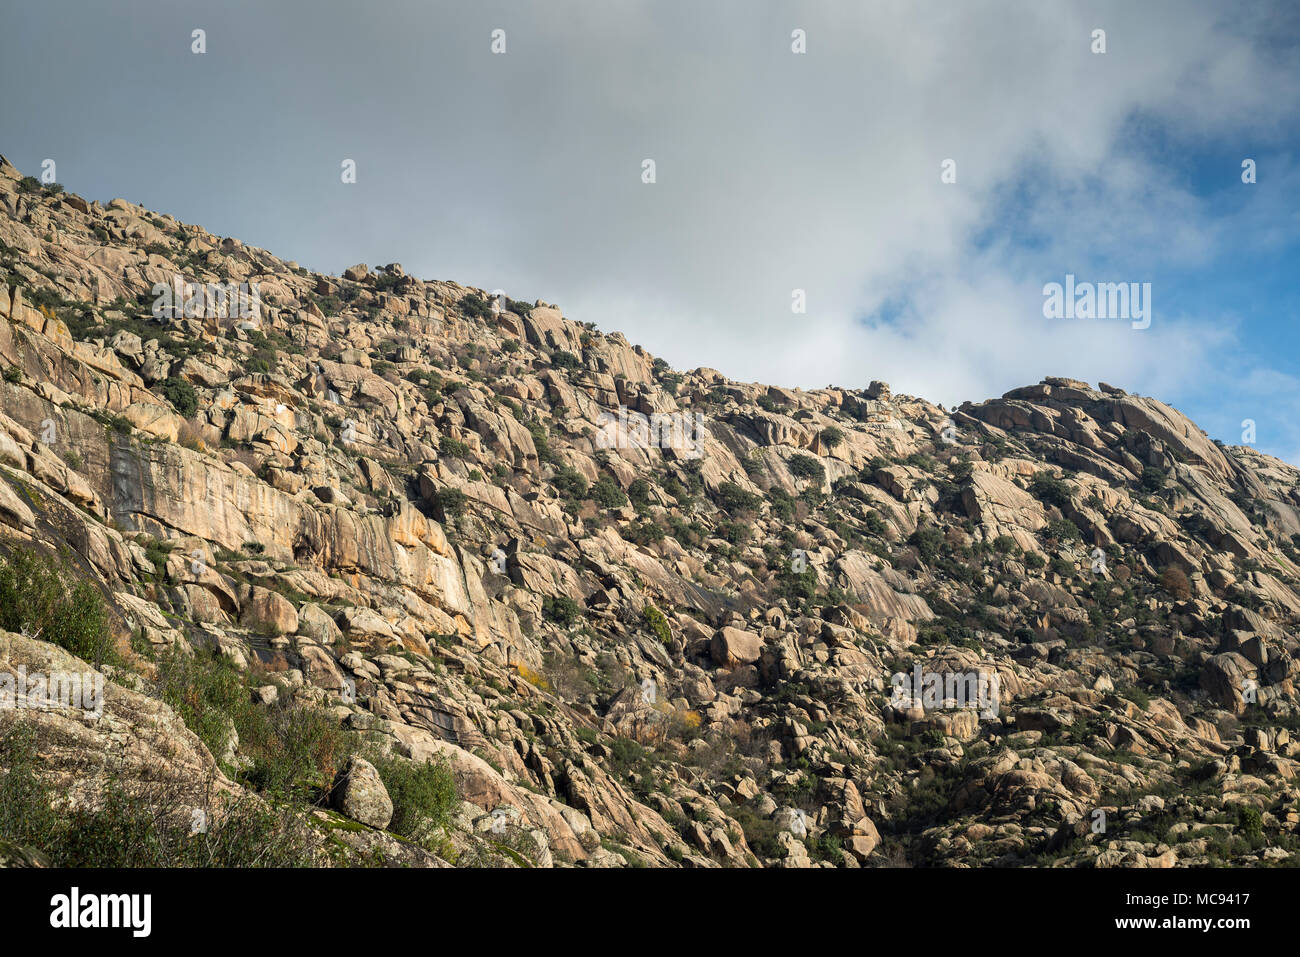 Granitic rock formations in La Pedriza, Guadarrama Mountains National Park, province of Madrid, Spain Stock Photo